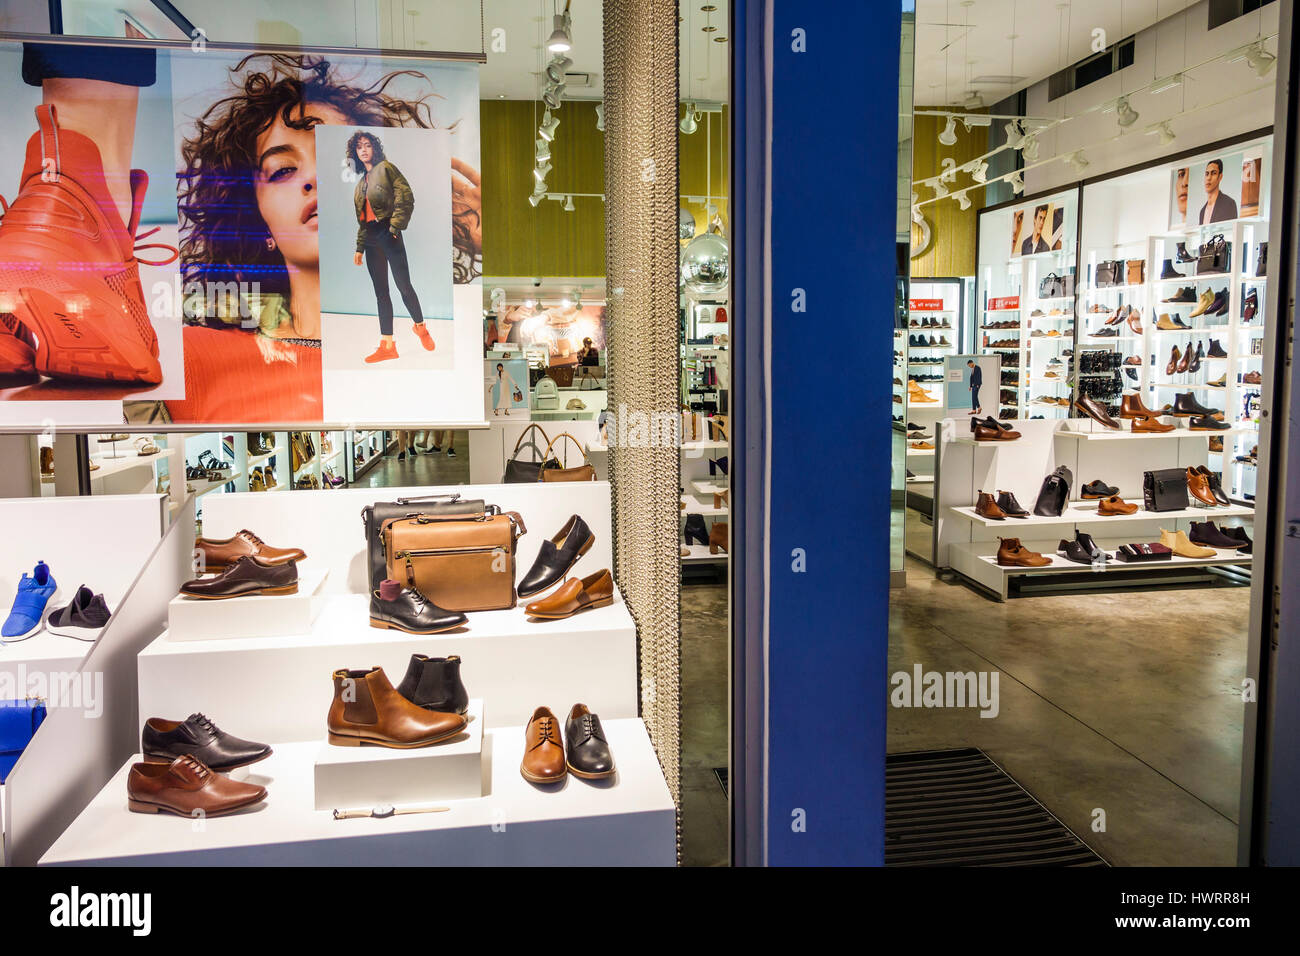 Faciliteter Et hundrede år anmodning Miami Beach Florida,Collins Avenue,Aldo Shoes footwear,shopping shoe store  business men's shoes window display entrance Stock Photo - Alamy